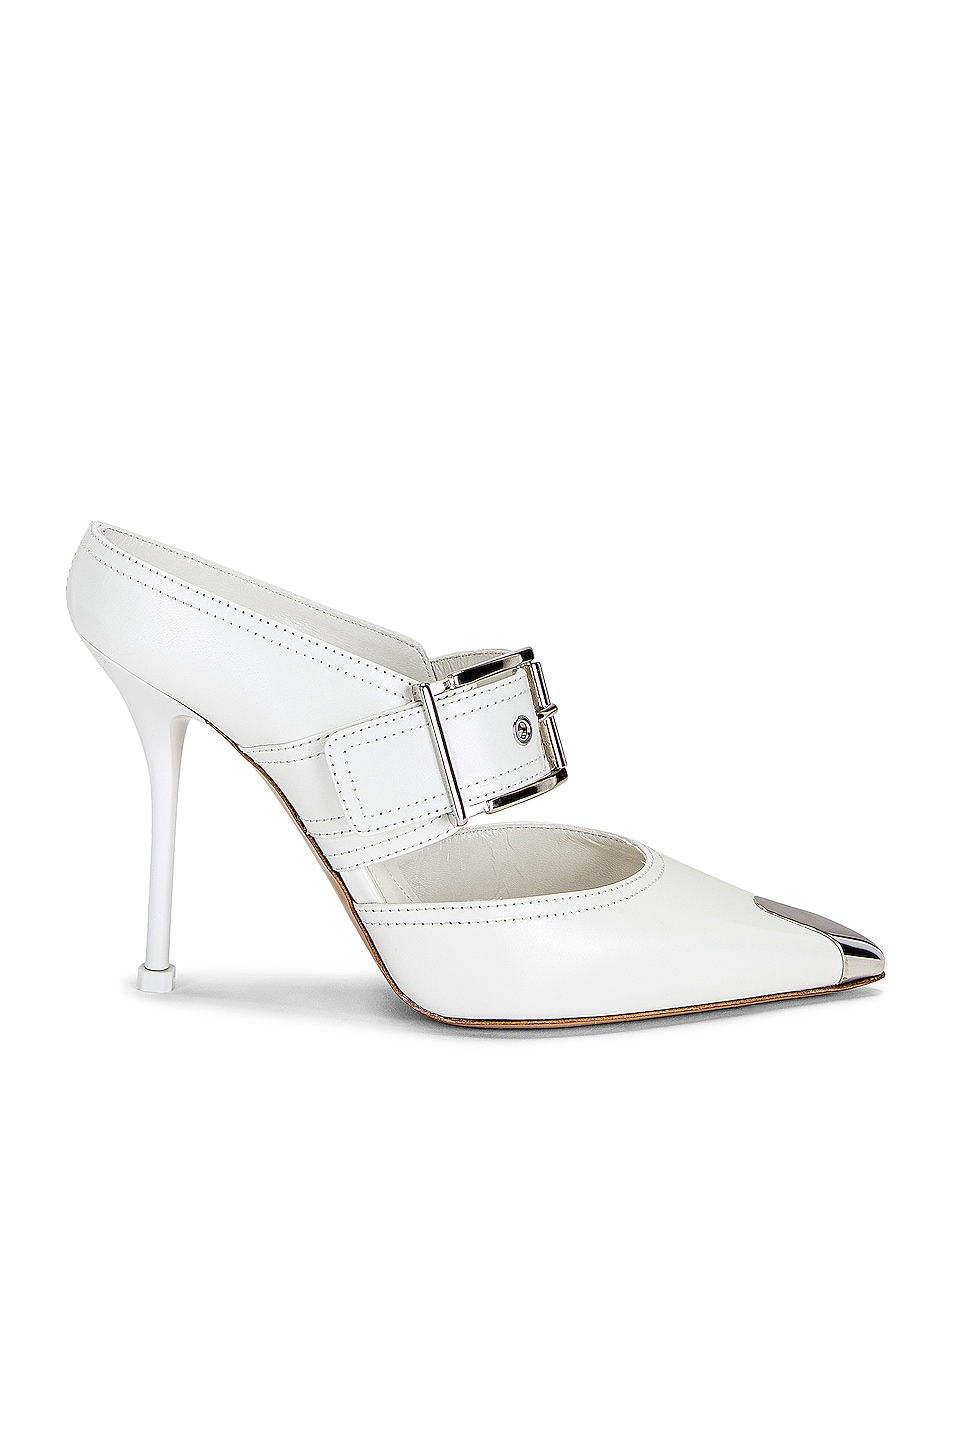 Image 1 of Alexander McQueen Boxcar Leather Heels in New Ivory & Silver